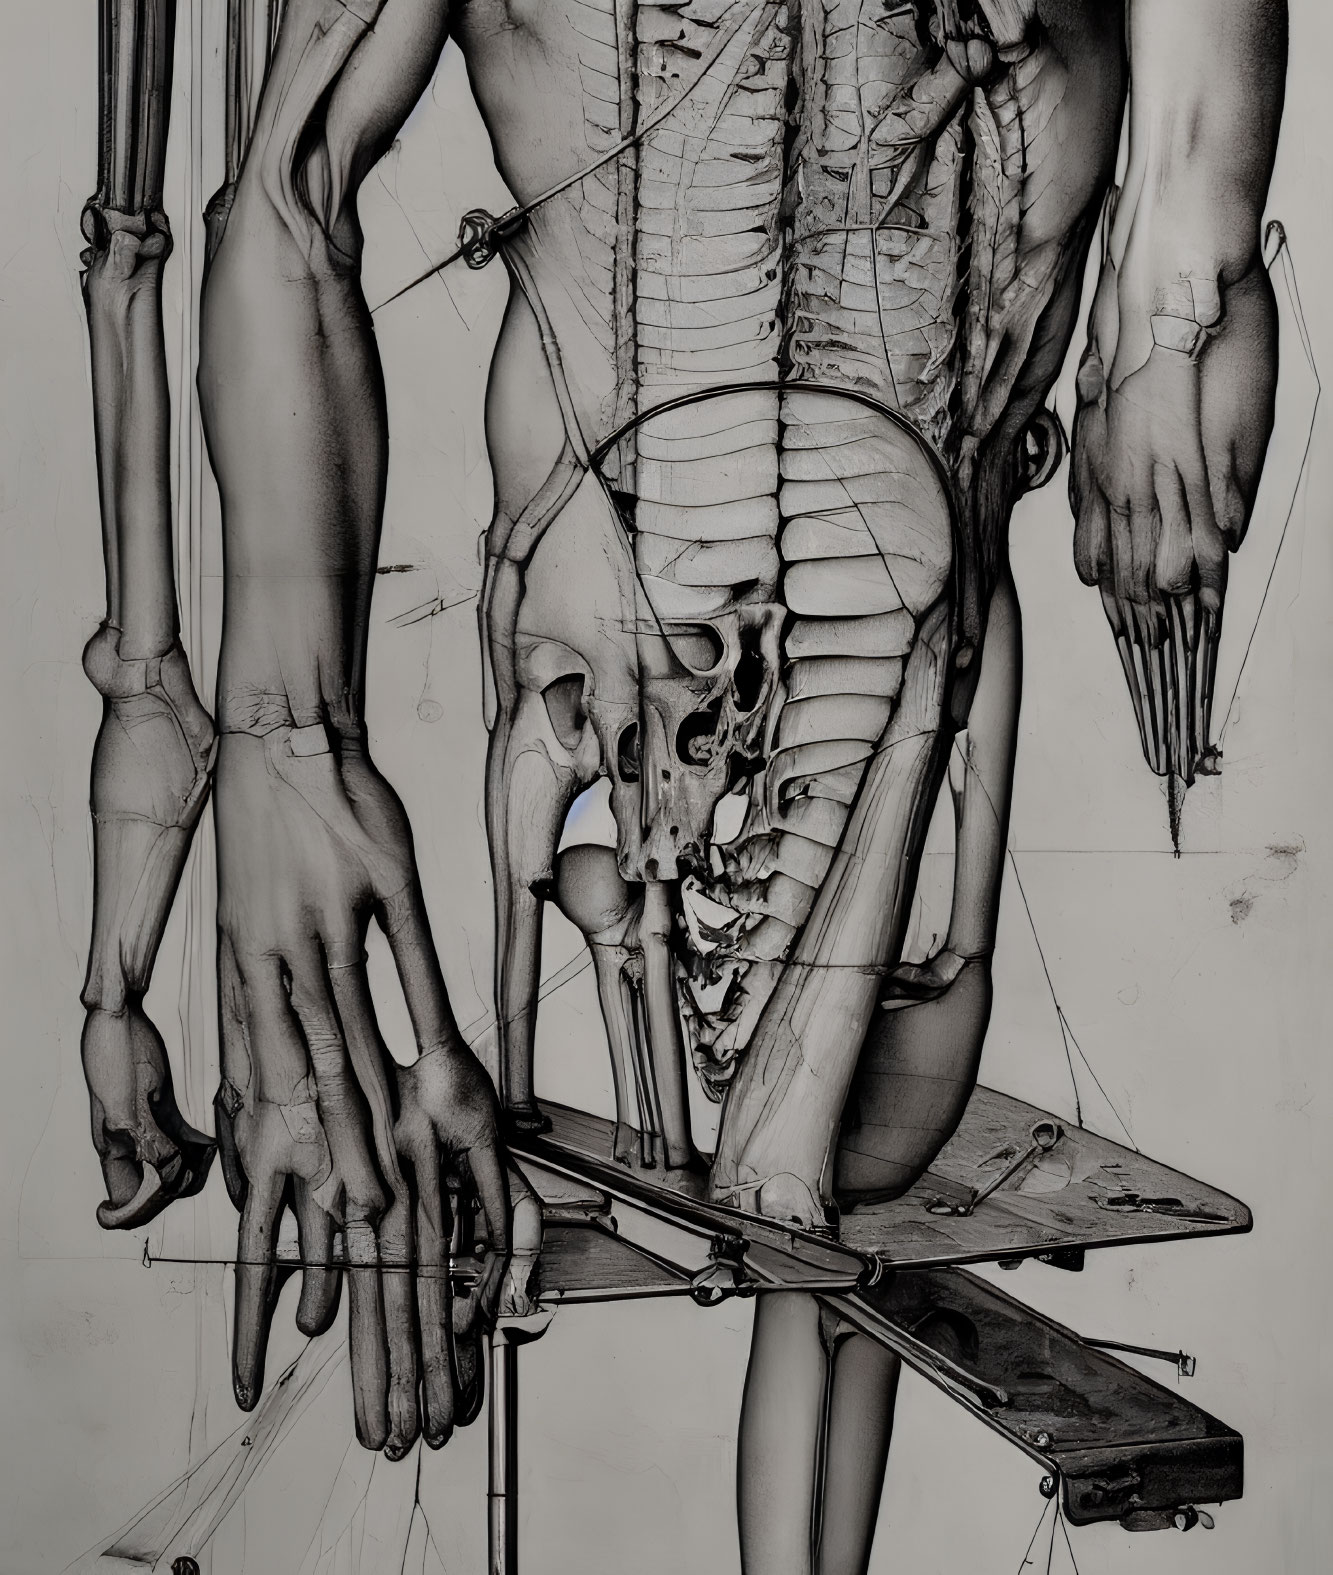 Monochrome anatomical illustration with skeletal and muscular structures and mechanical elements